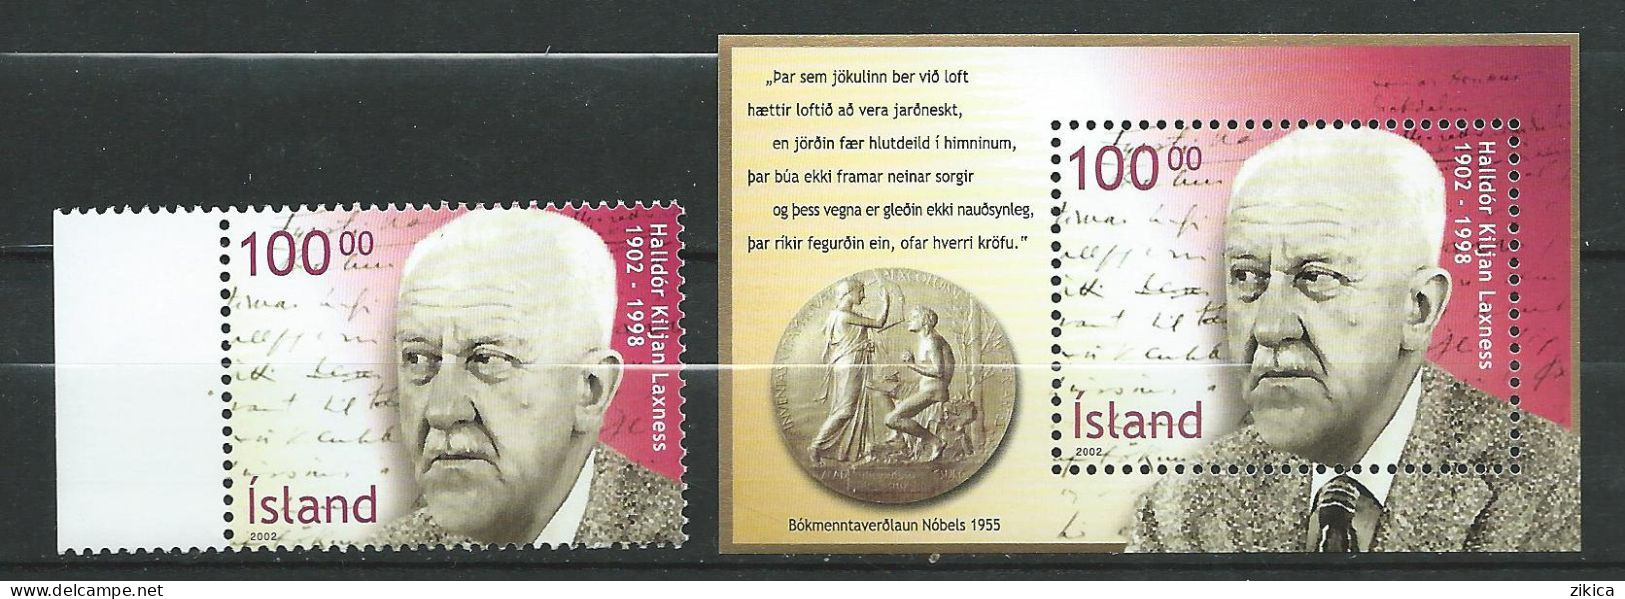 Iceland 2002 The 100th Ann. Of The Birth Of Nobel Prize Winner Halldor Laxness.Block And Stamp. MNH** - Ongebruikt